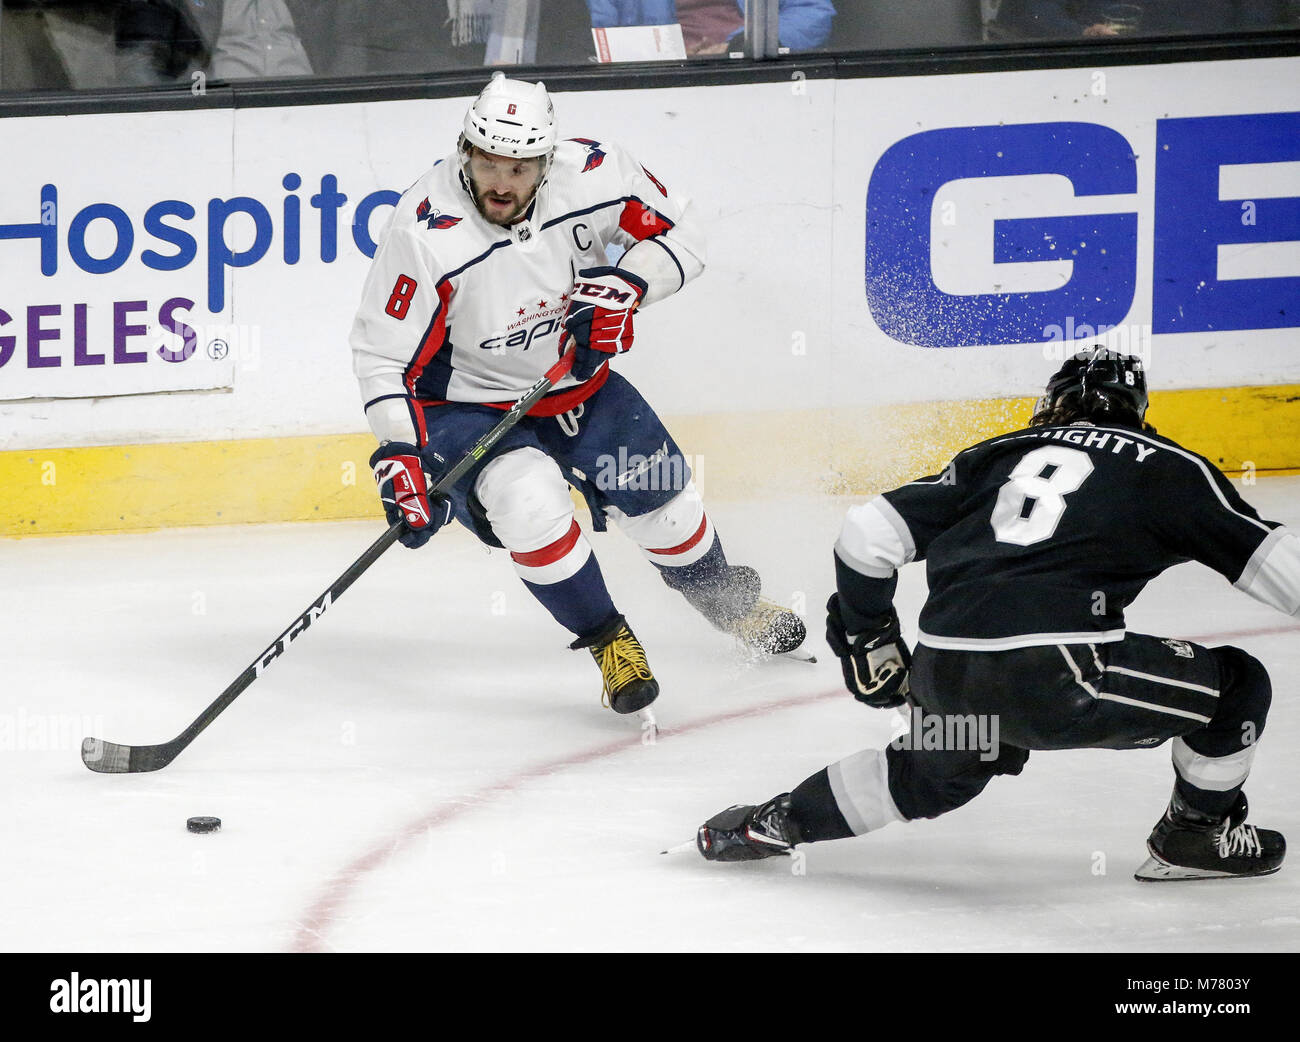 Los Angeles, California, USA. 8th Mar, 2018. Washington Capitals' forward Alex Ovechkin (8) vies with Los Angeles Kings' defenseman Drew Doughty (8) during a 2017-2018 NHL hockey game in Los Angeles, on March 8, 2018. The Kings won 3-1. Credit: Ringo Chiu/ZUMA Wire/Alamy Live News Stock Photo